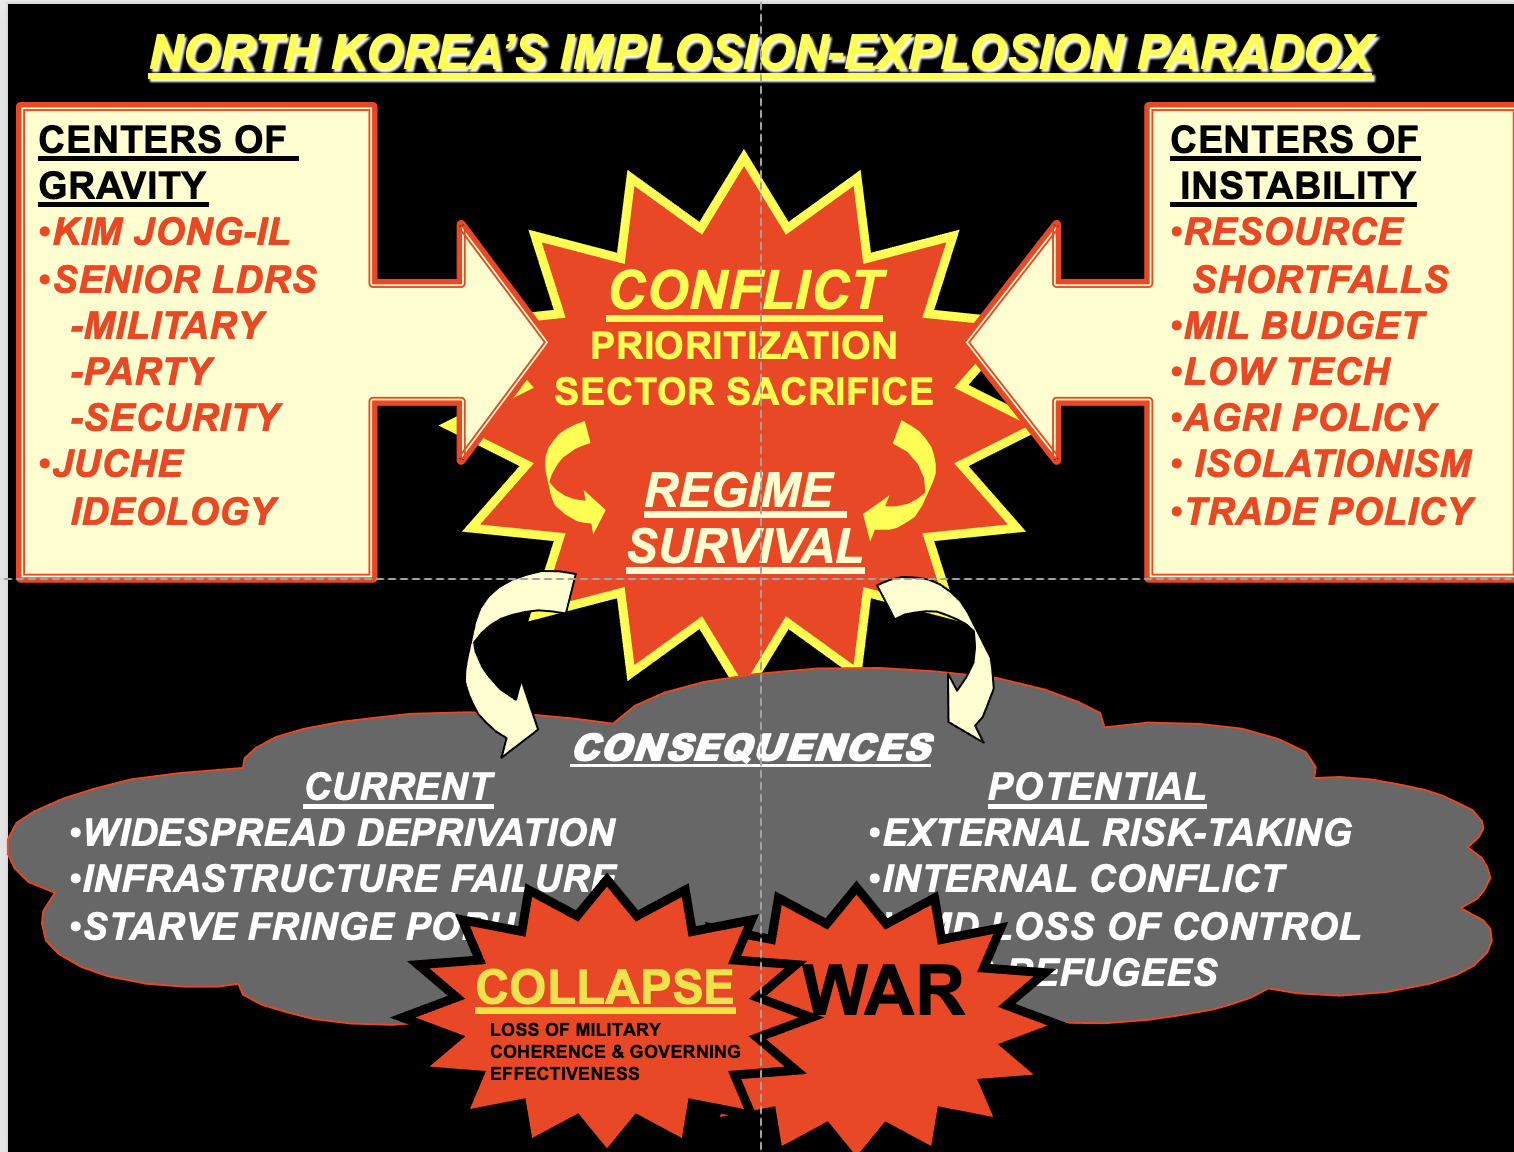 Implosion and Explostion Paradox